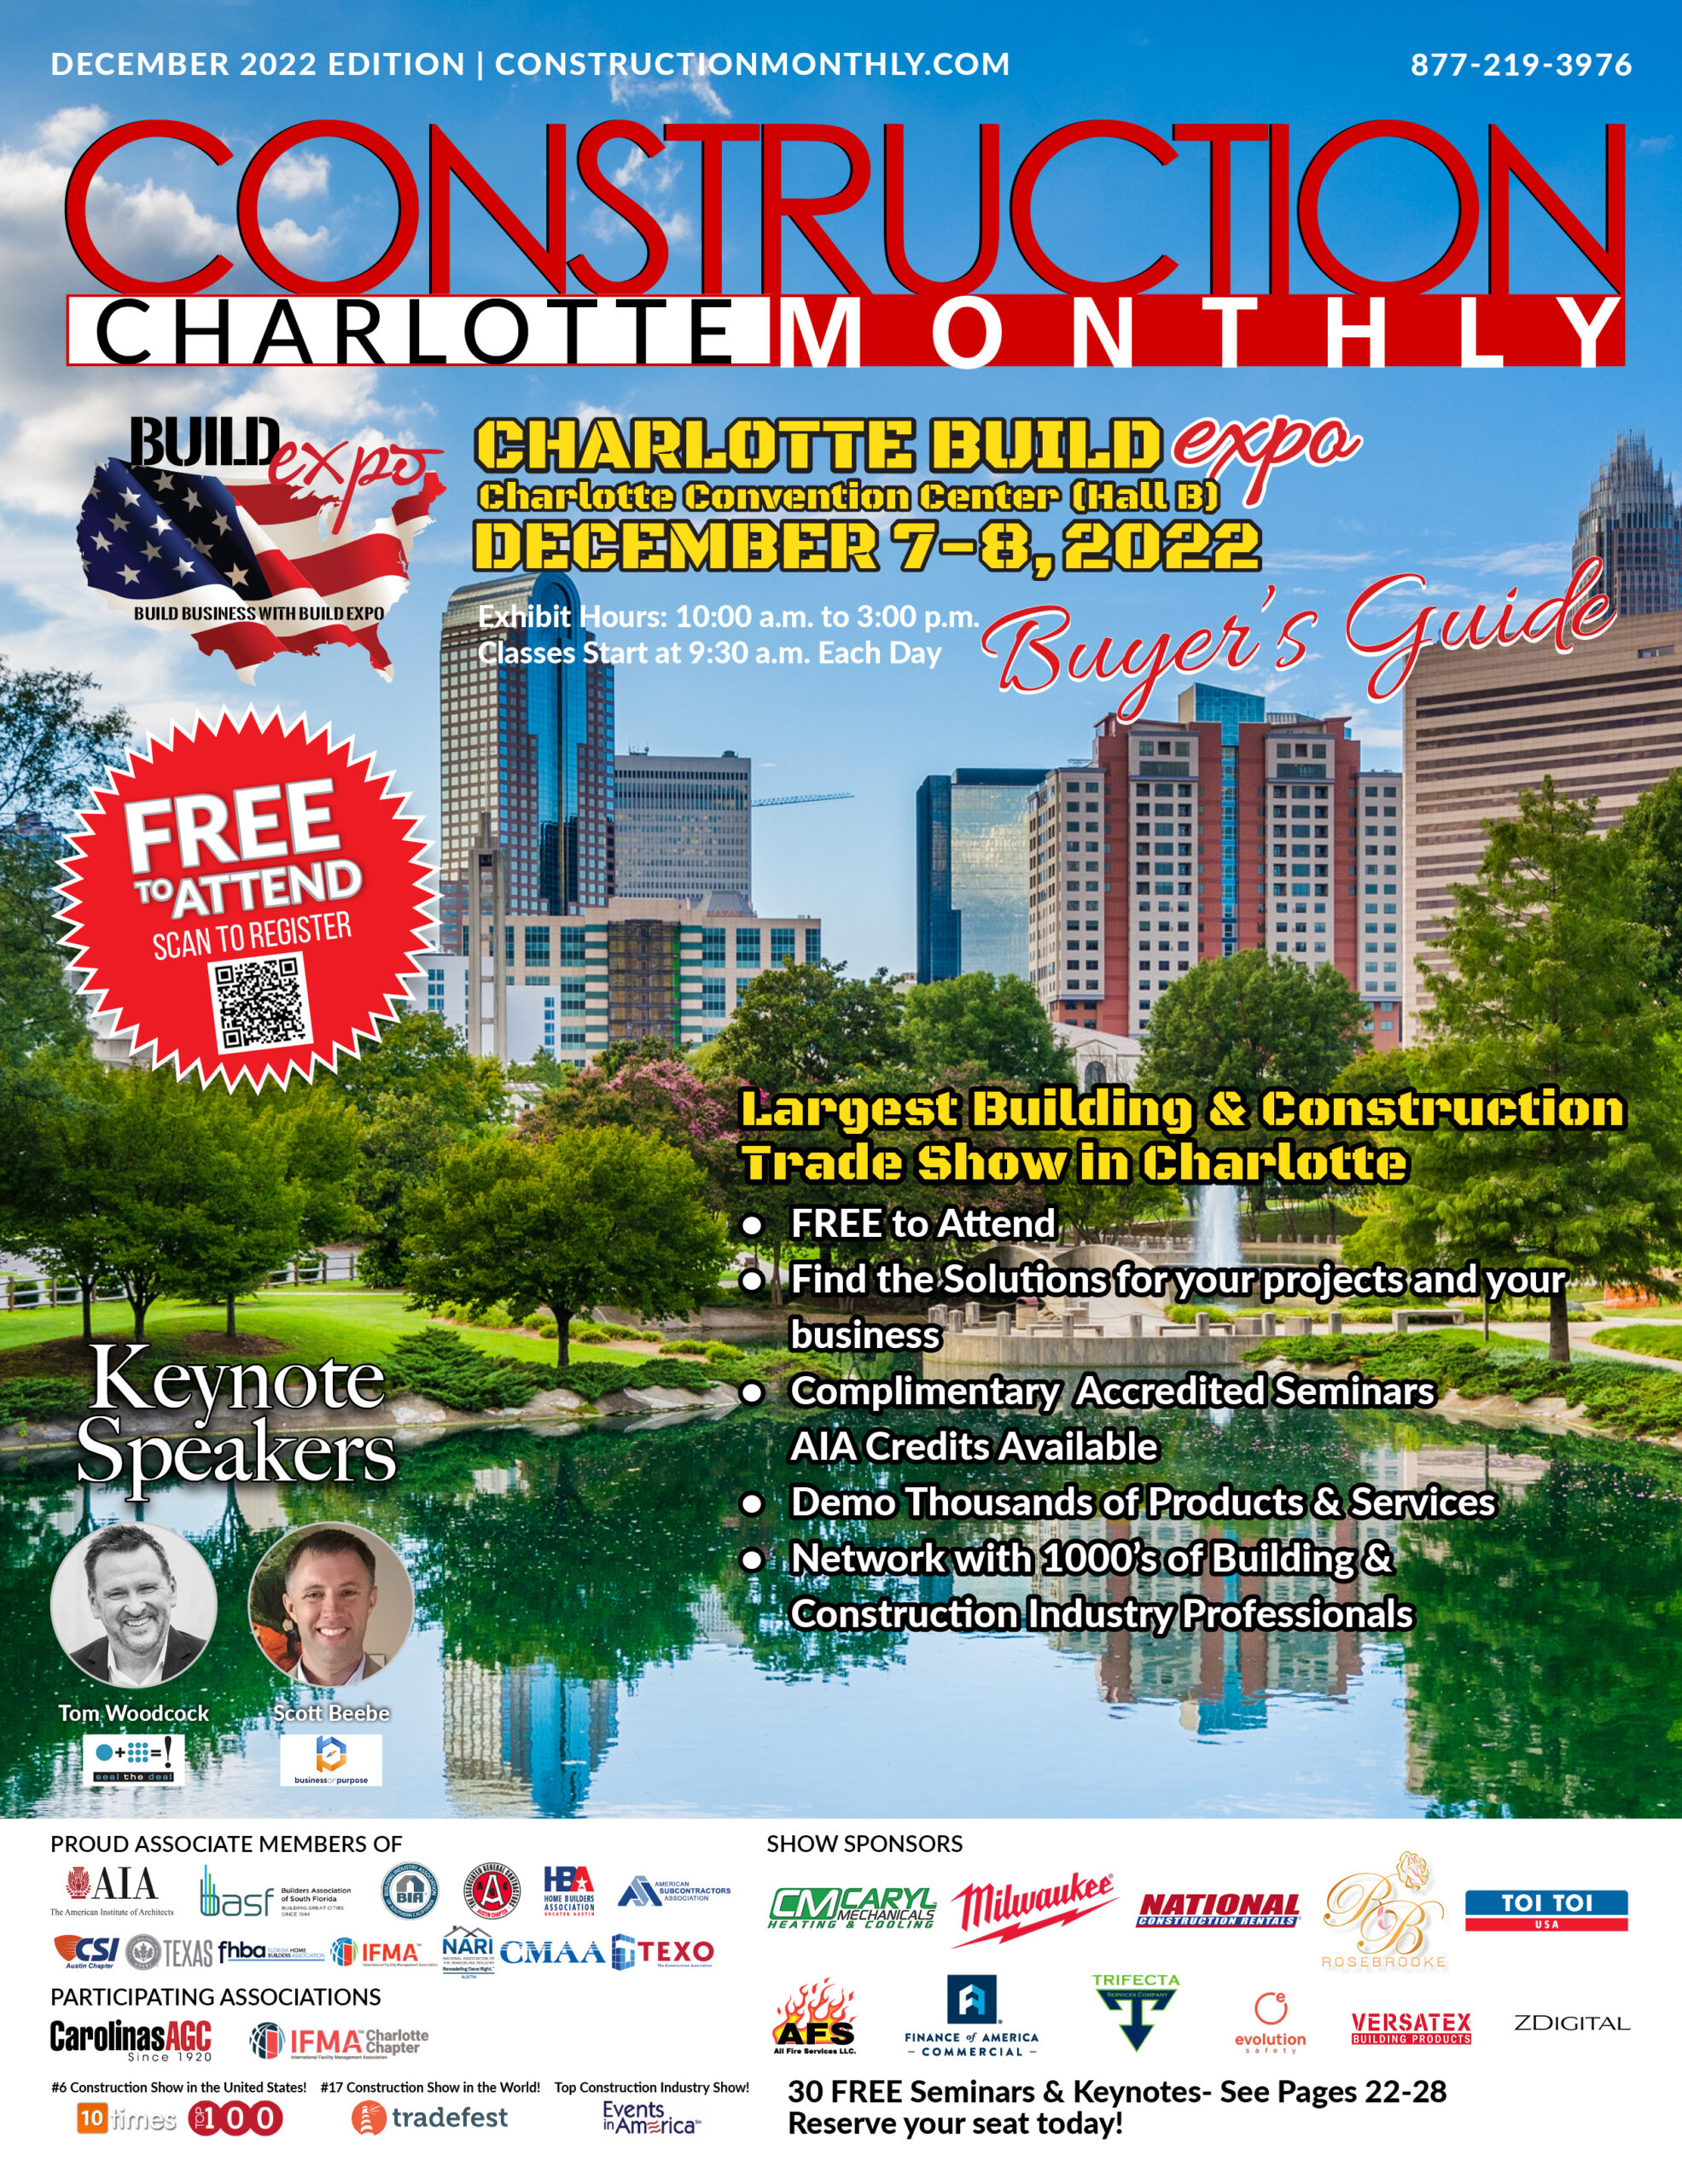 2022 Charlotte Construction Monthly